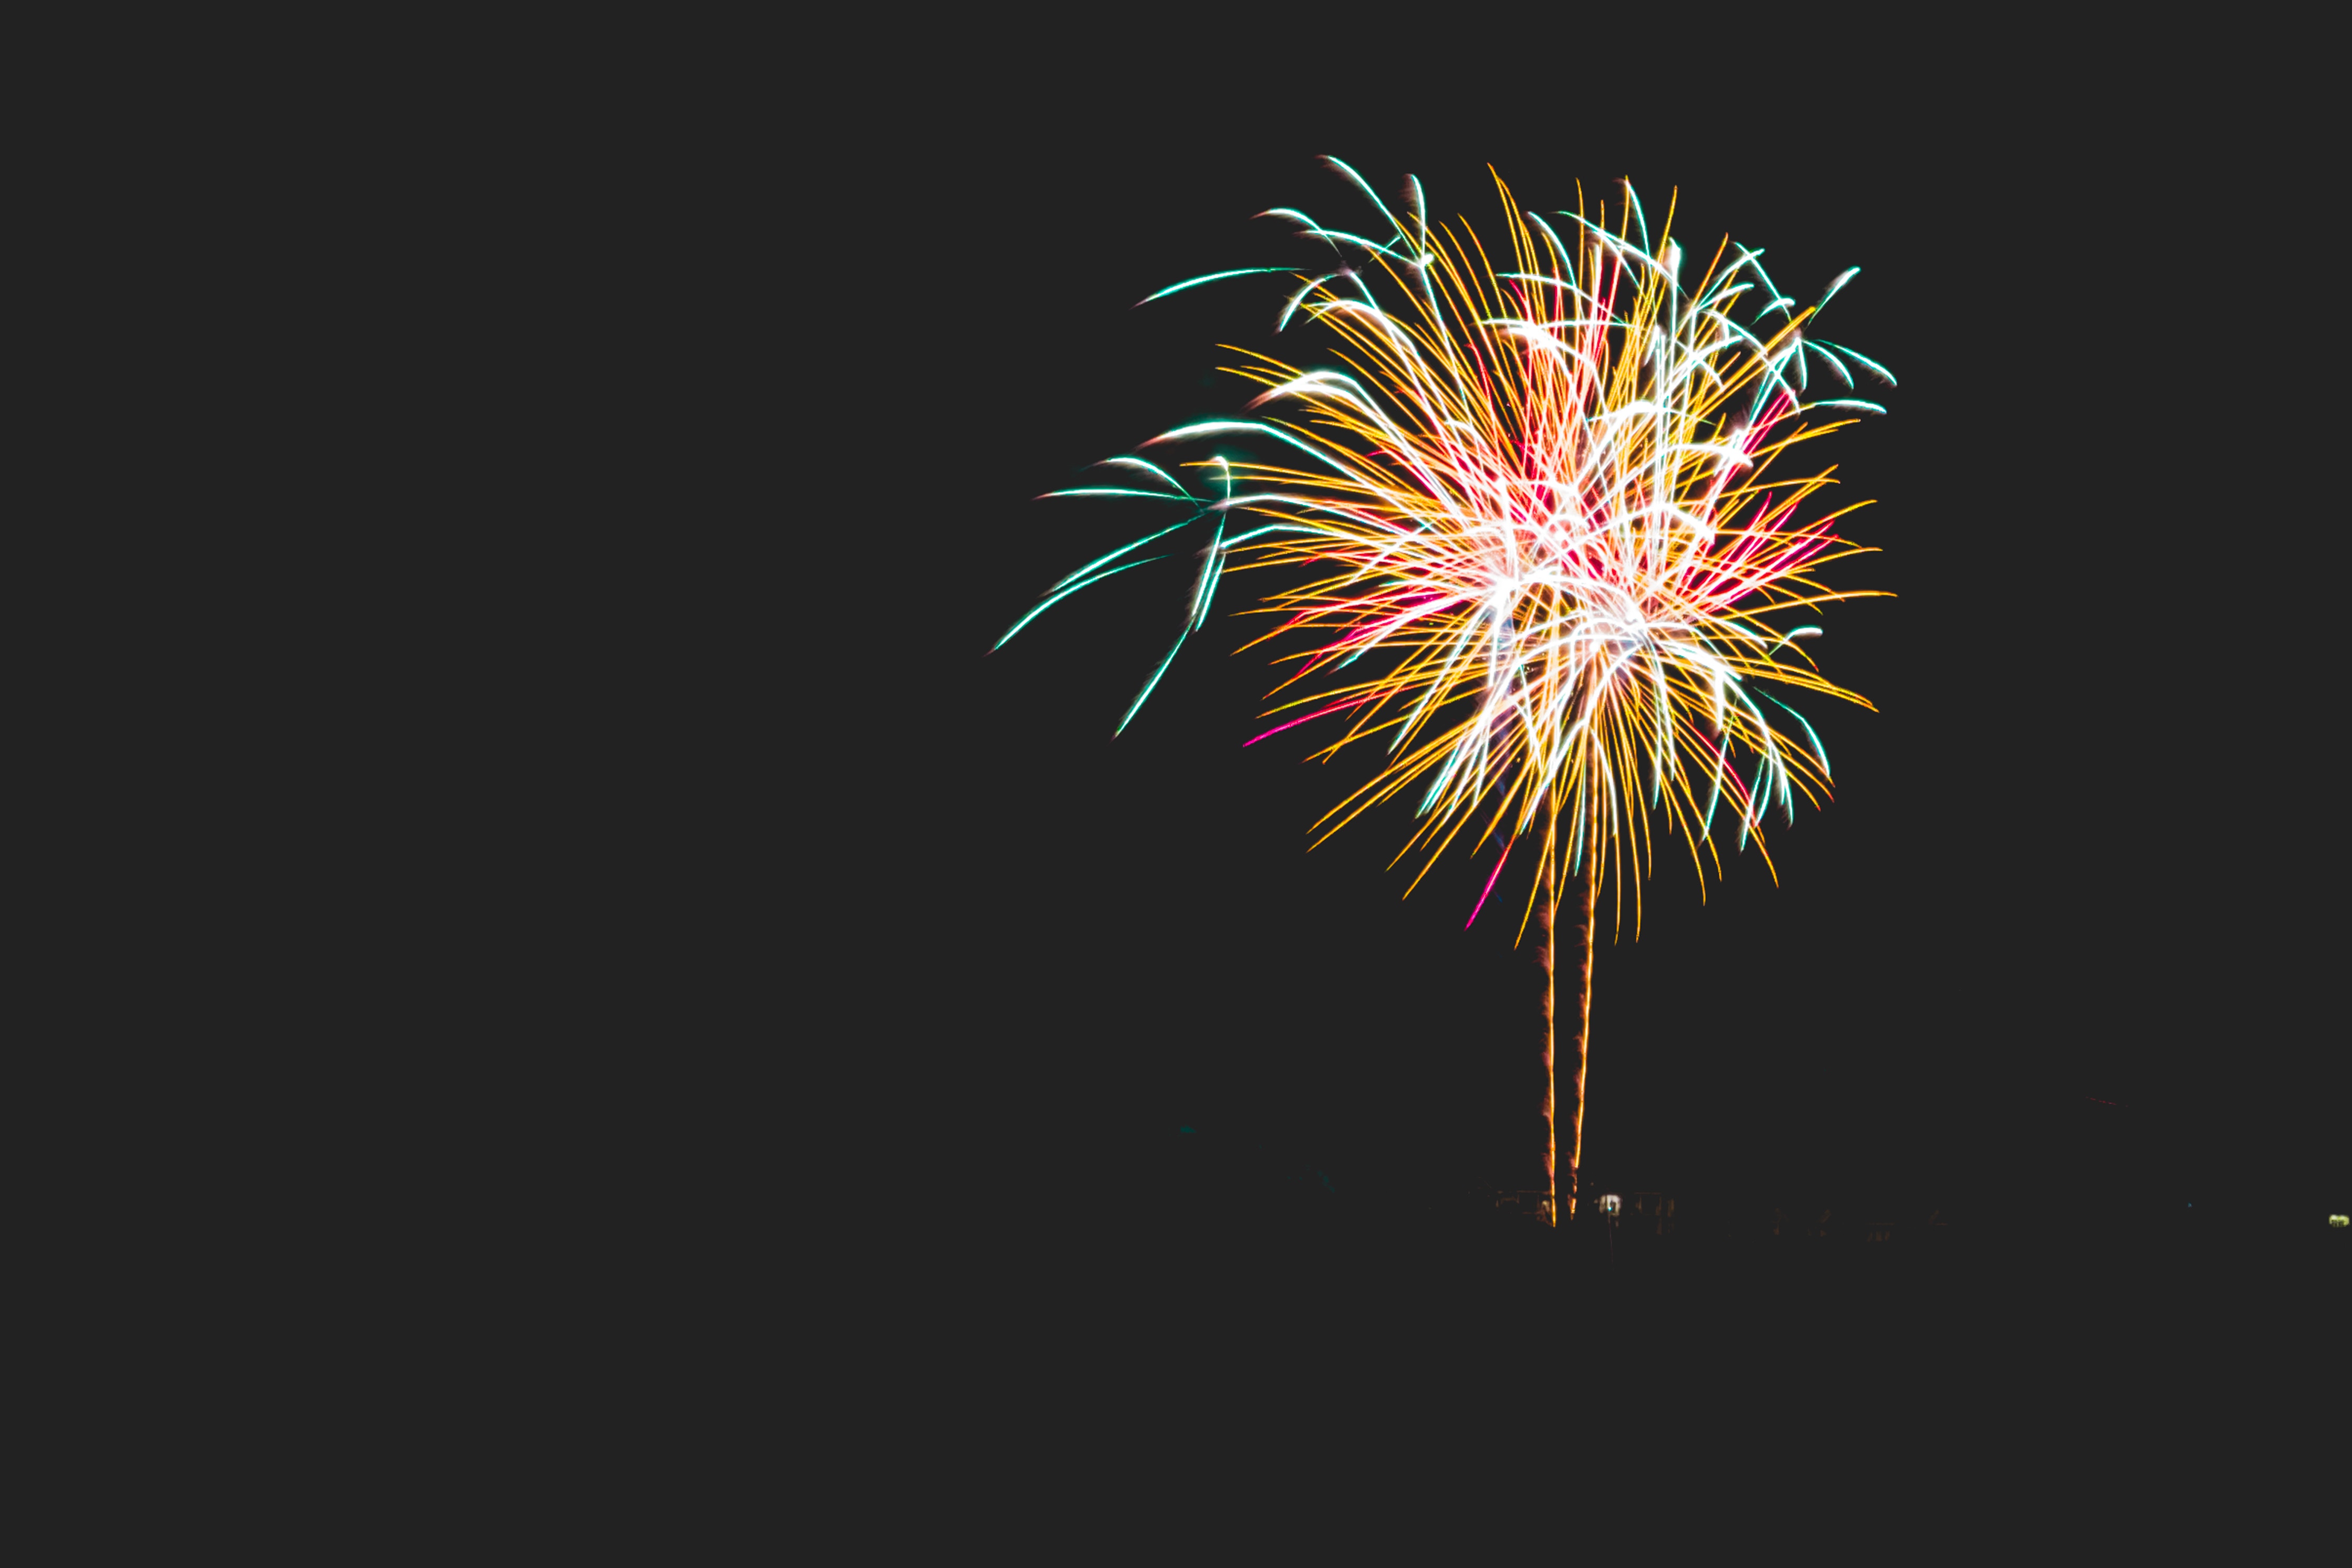 multicolored, salute, night, dark, sparks, motley, holiday, fireworks, firework, crumble 2160p